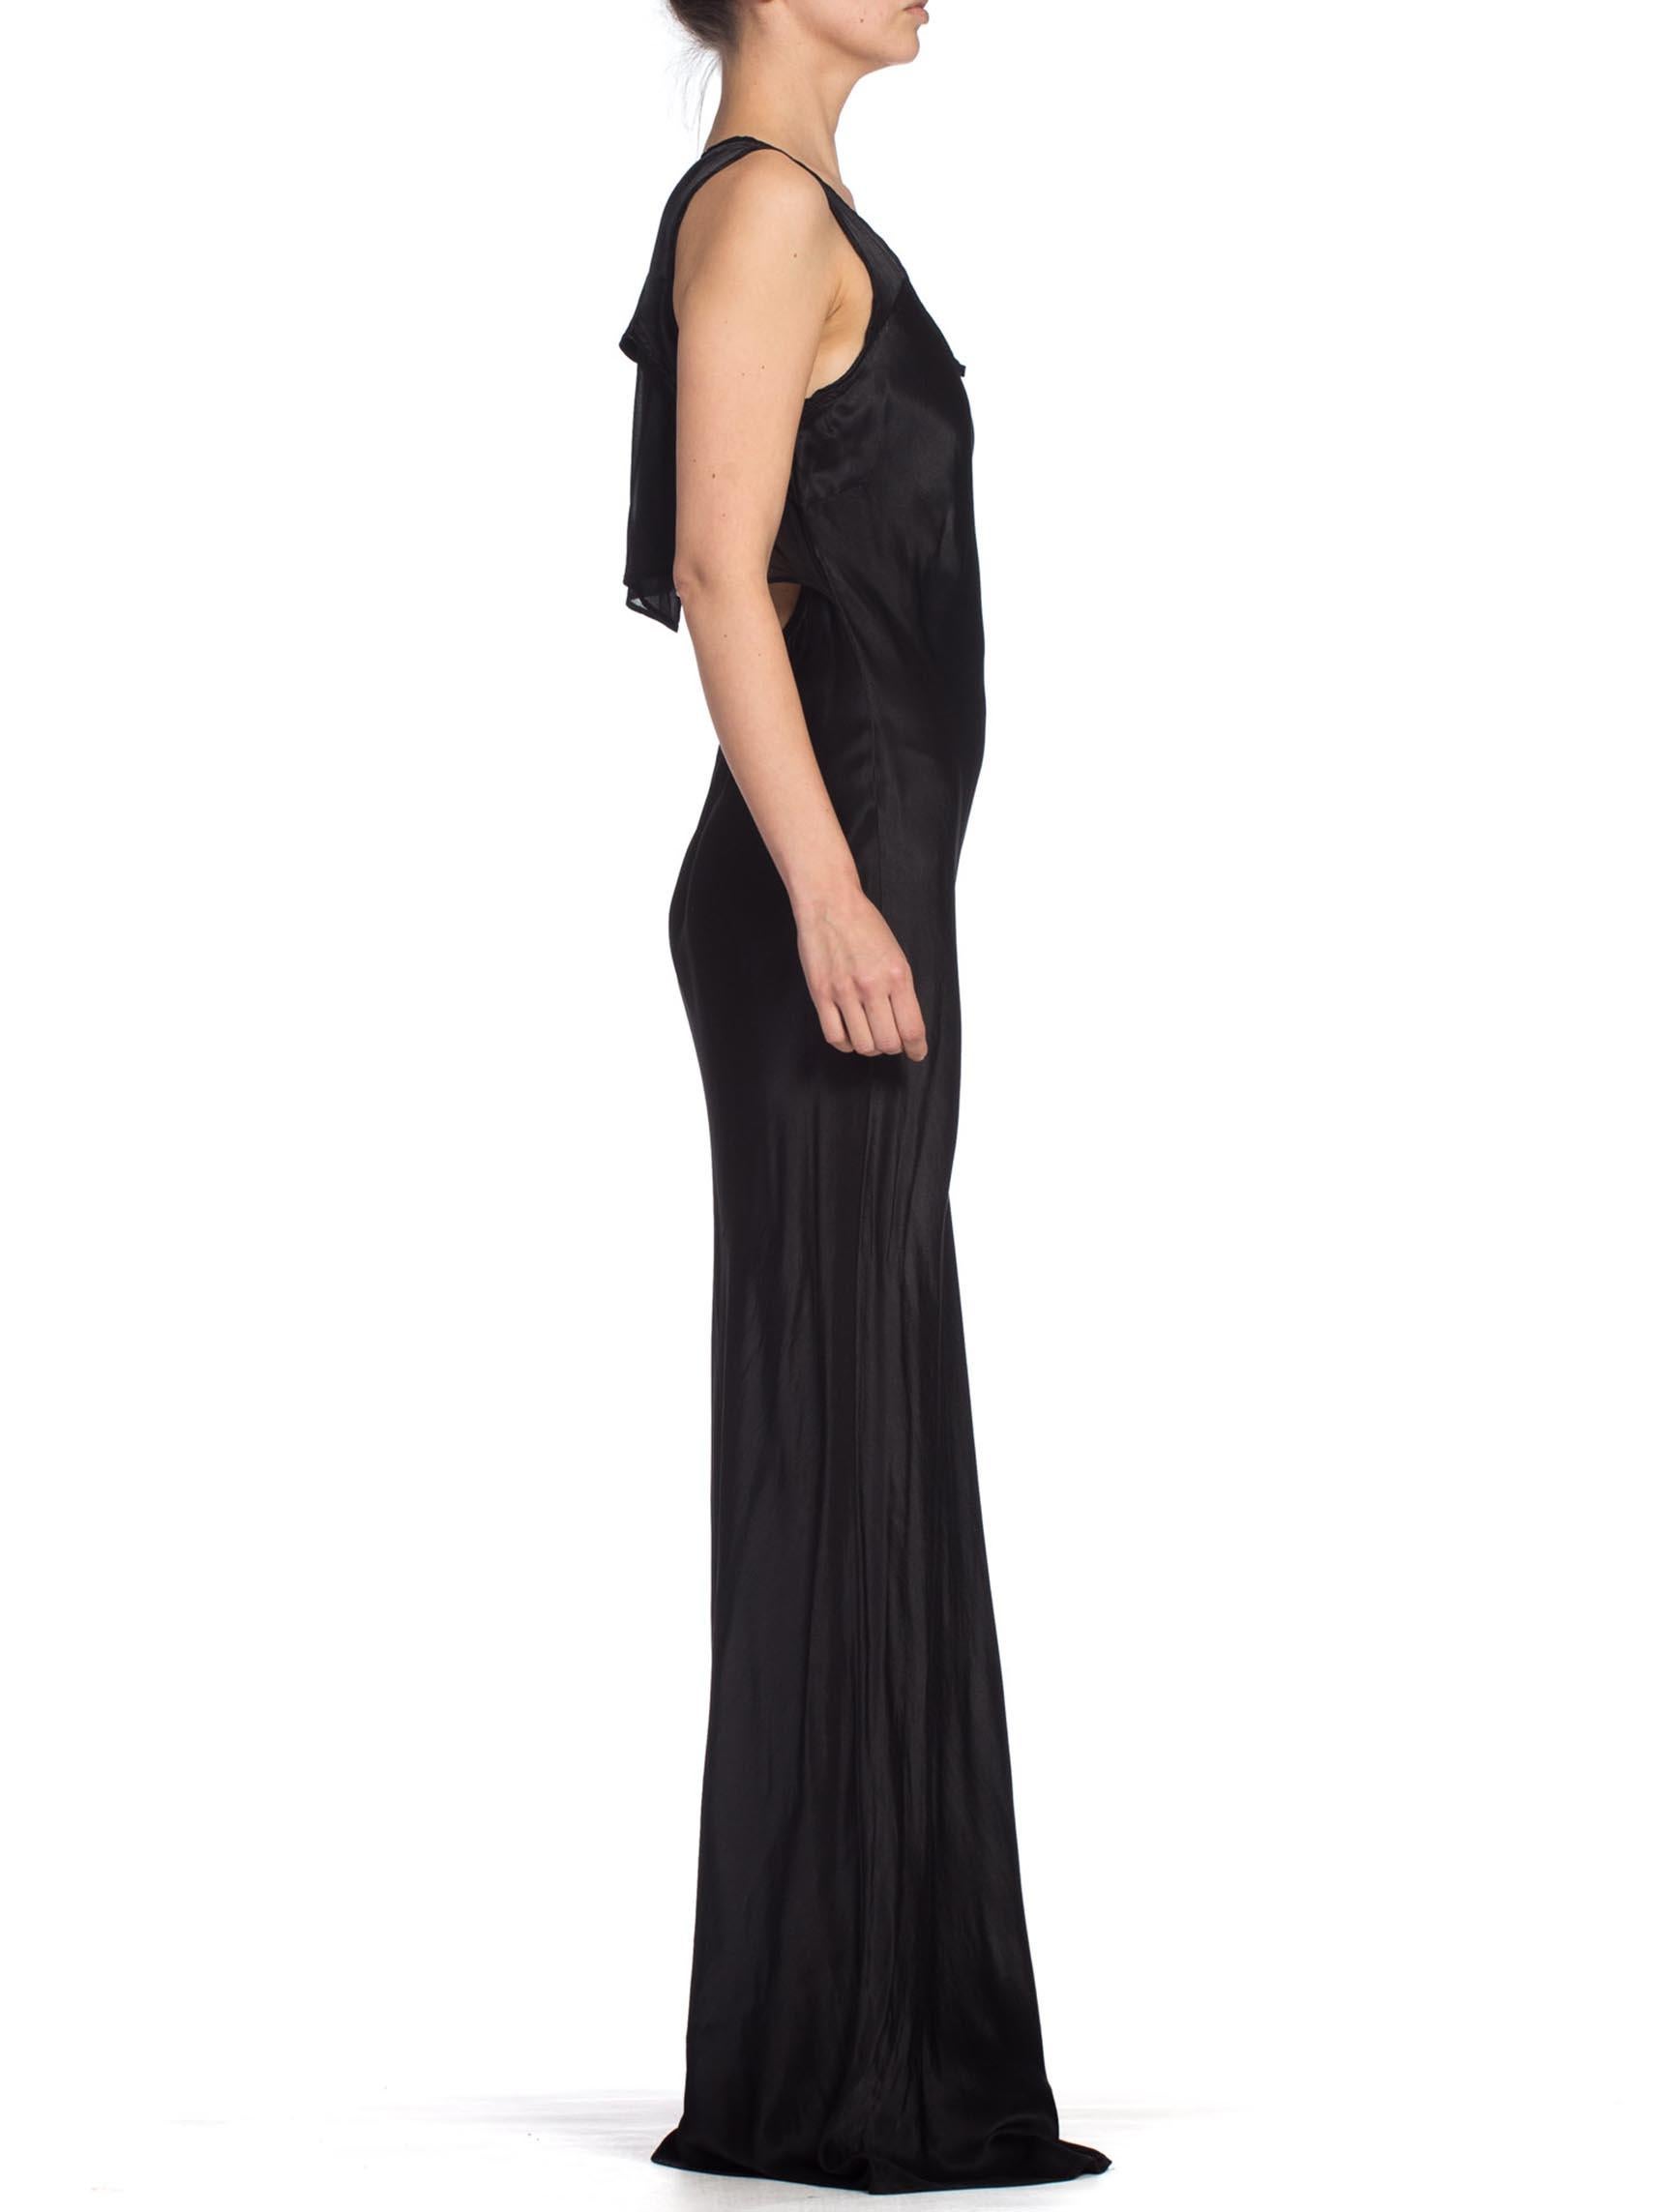 1990S GHOST Black Rayon Charmeuse Minimal Bias Cut Backless Gown With Chiffon Panel